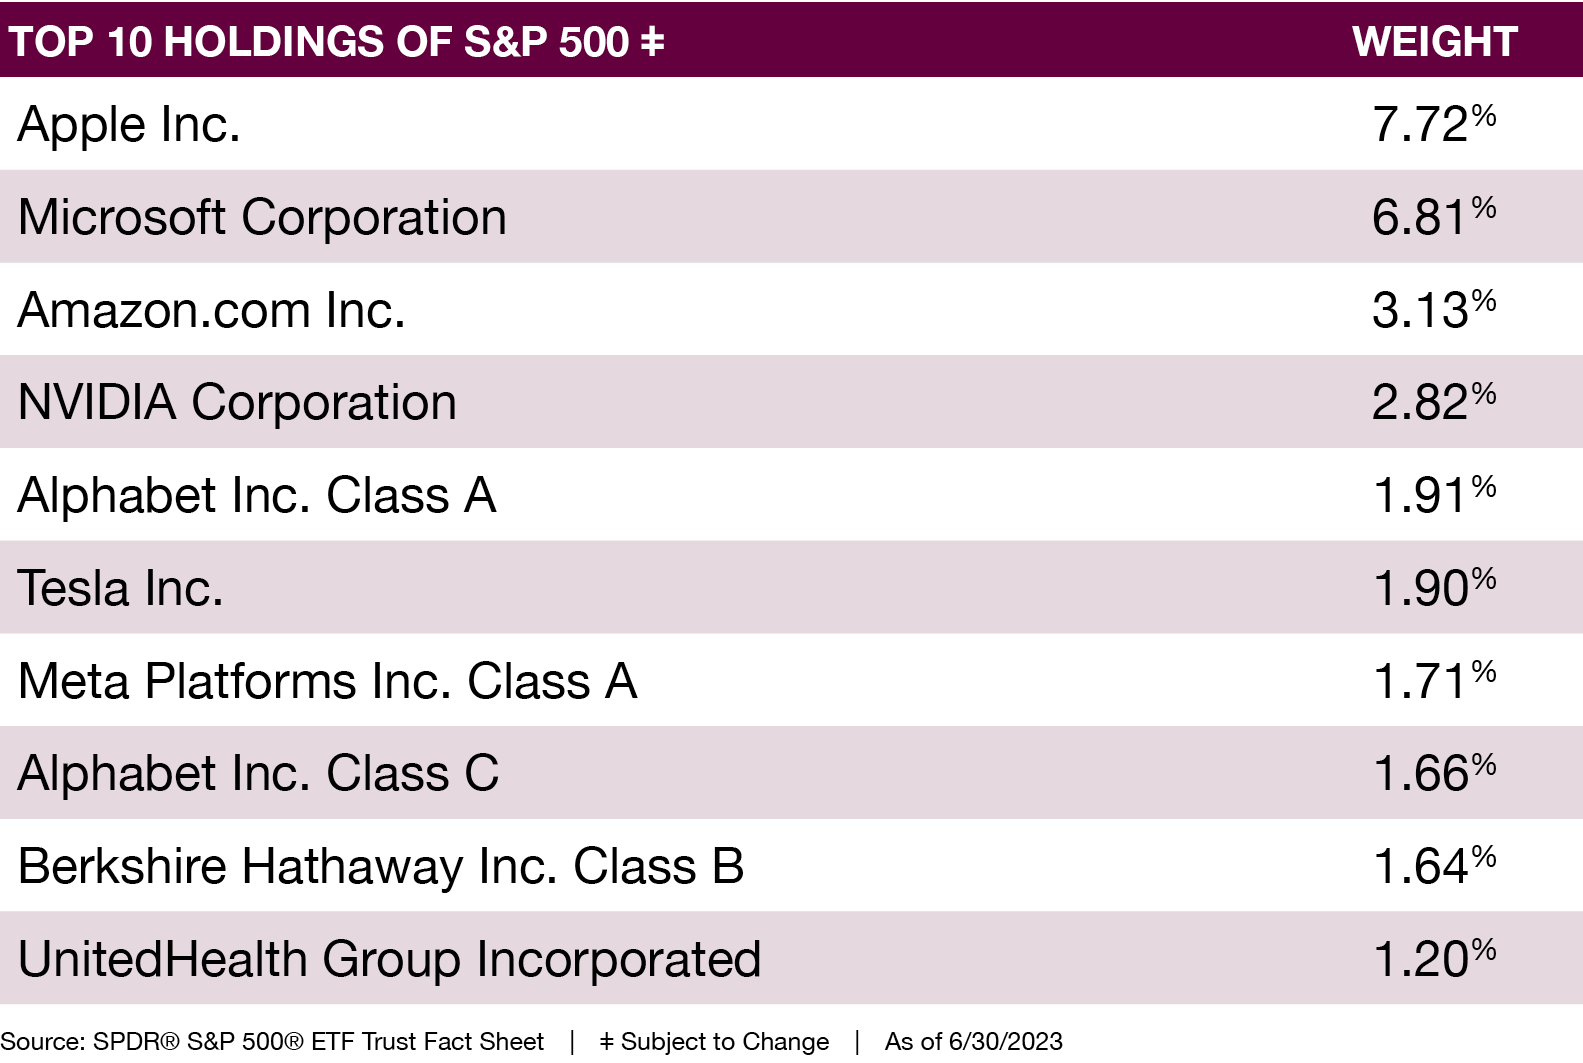 A chart showing the top 10 holdings of the S&P 500